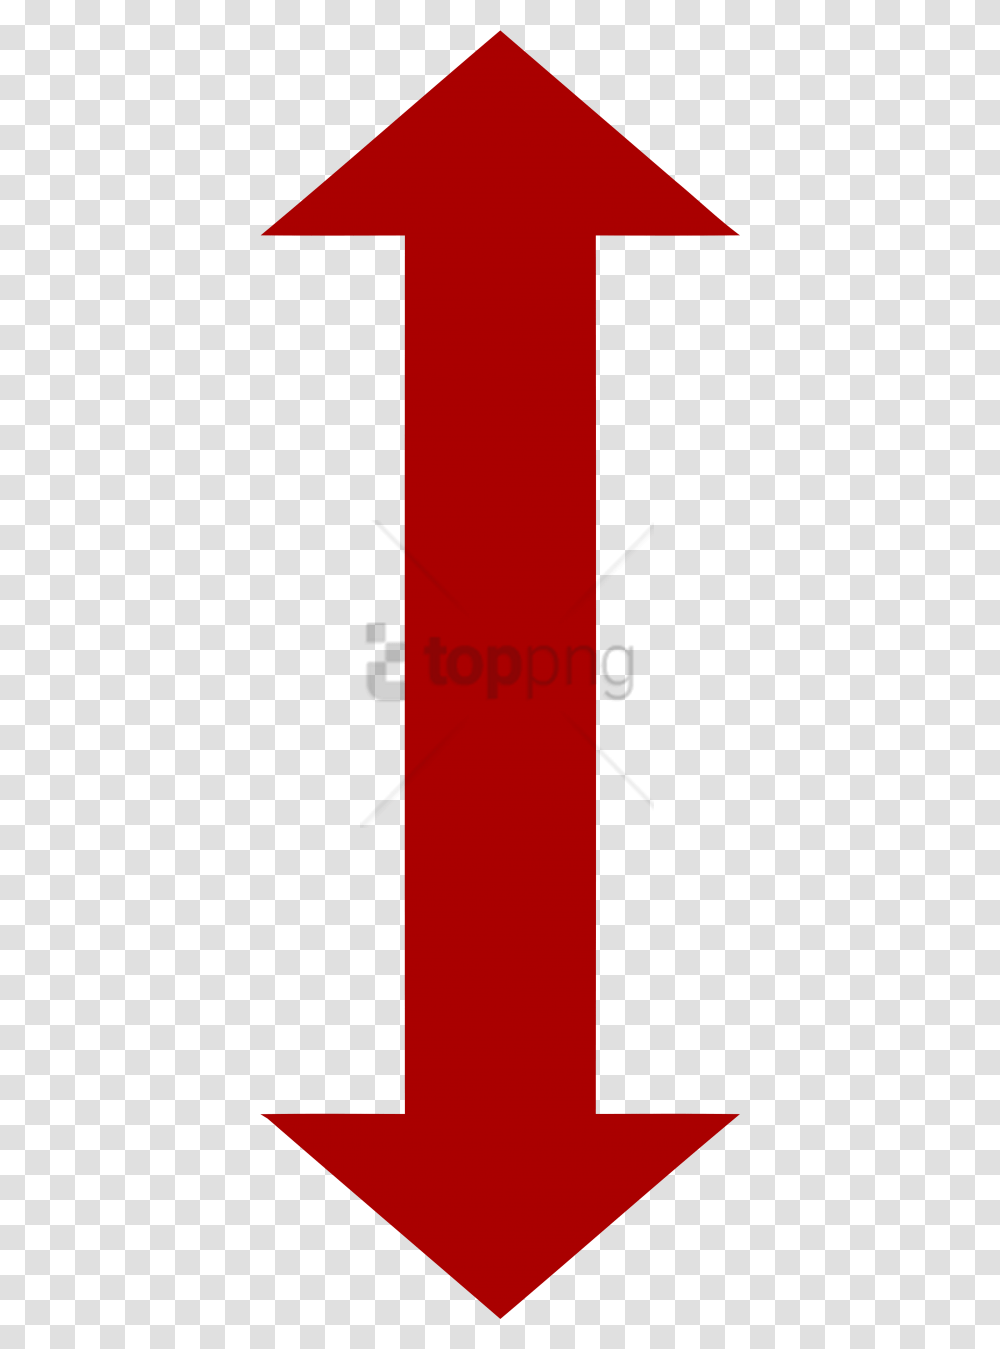 Free Two Way Red Arrow Image With Both Side Arrow Symbol, Weapon, Bomb, Cross Transparent Png